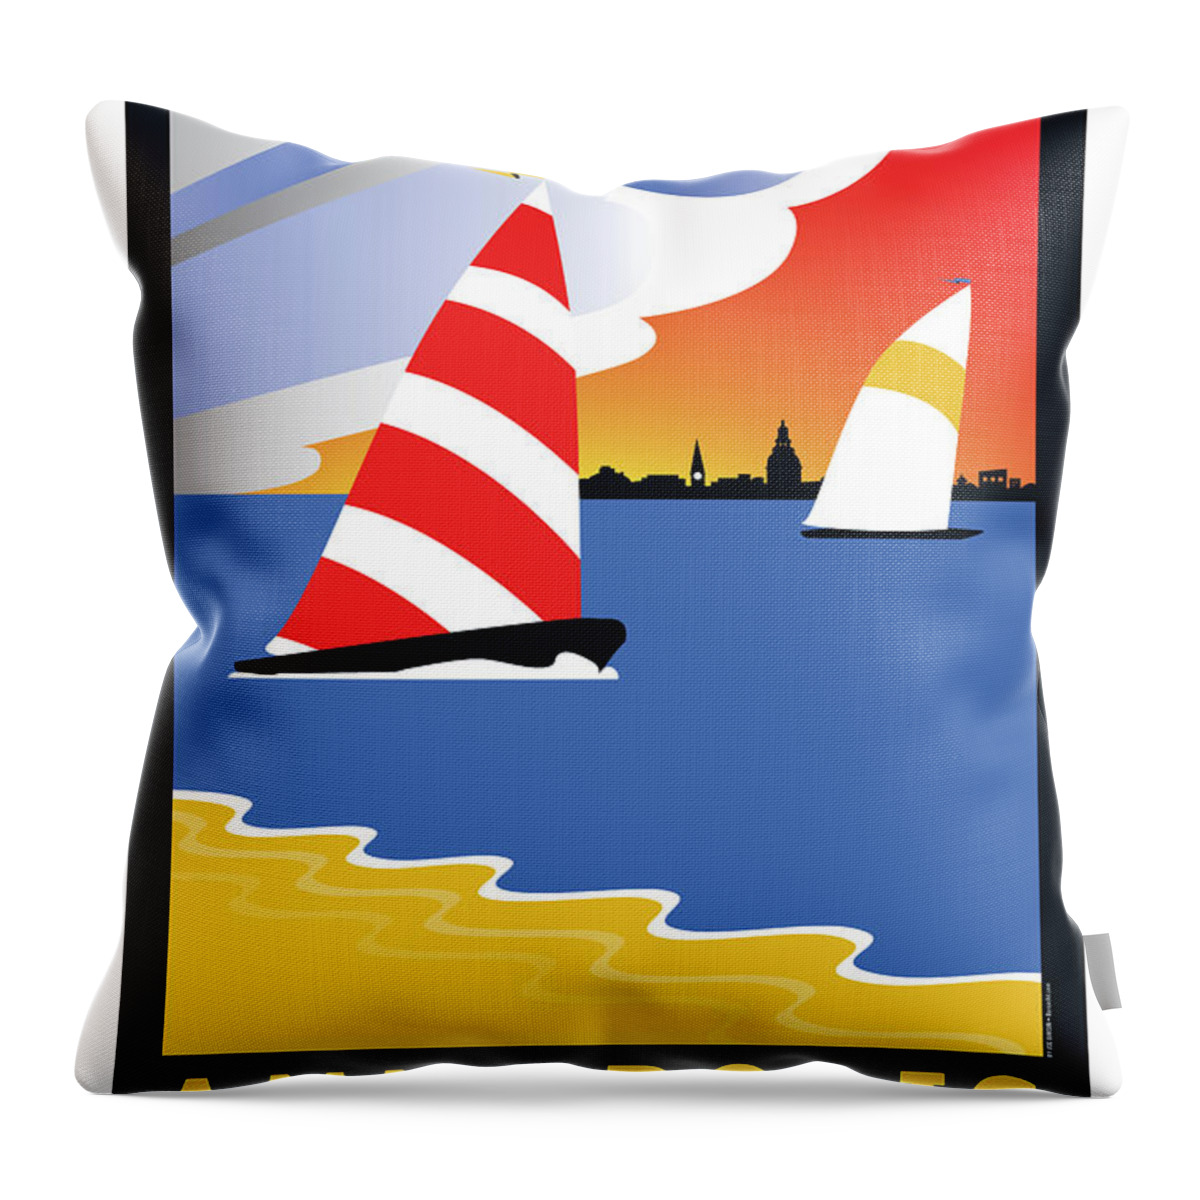 Sailing Throw Pillow featuring the digital art Wednesday Afternoon by Joe Barsin